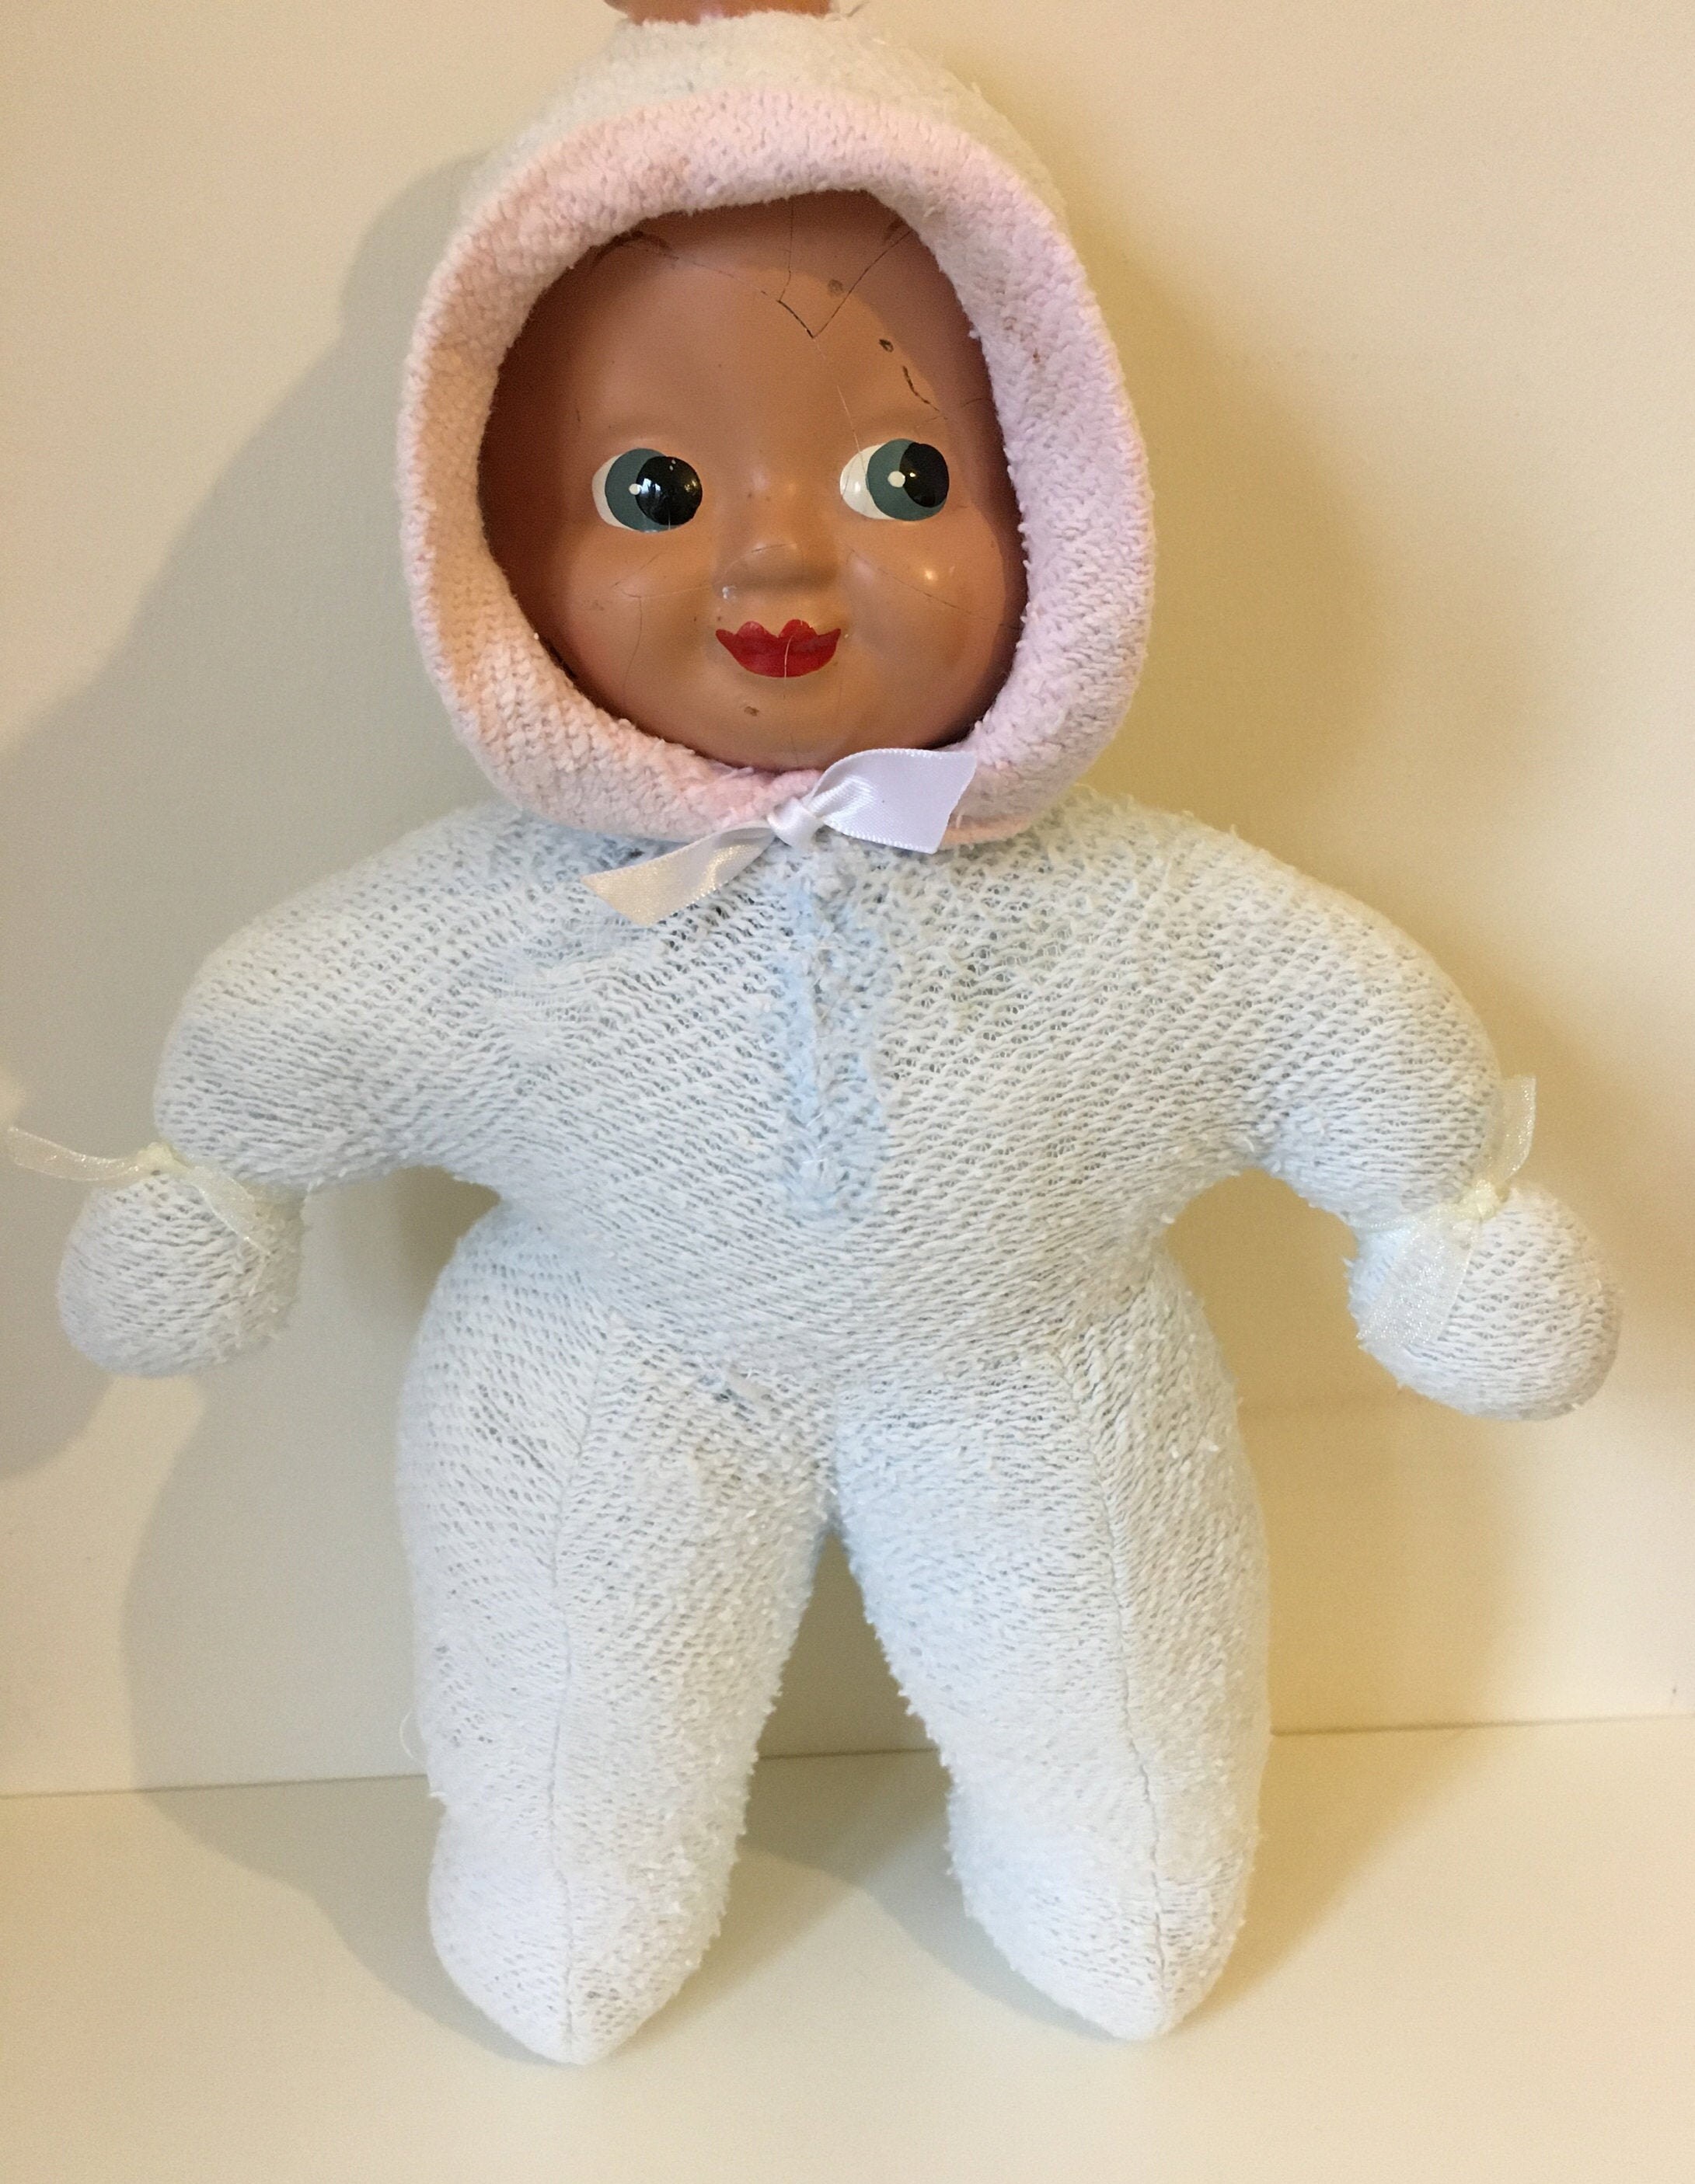 Vintage Trudy Doll Baby Faced Doll Bisque Head Soft Body Etsy